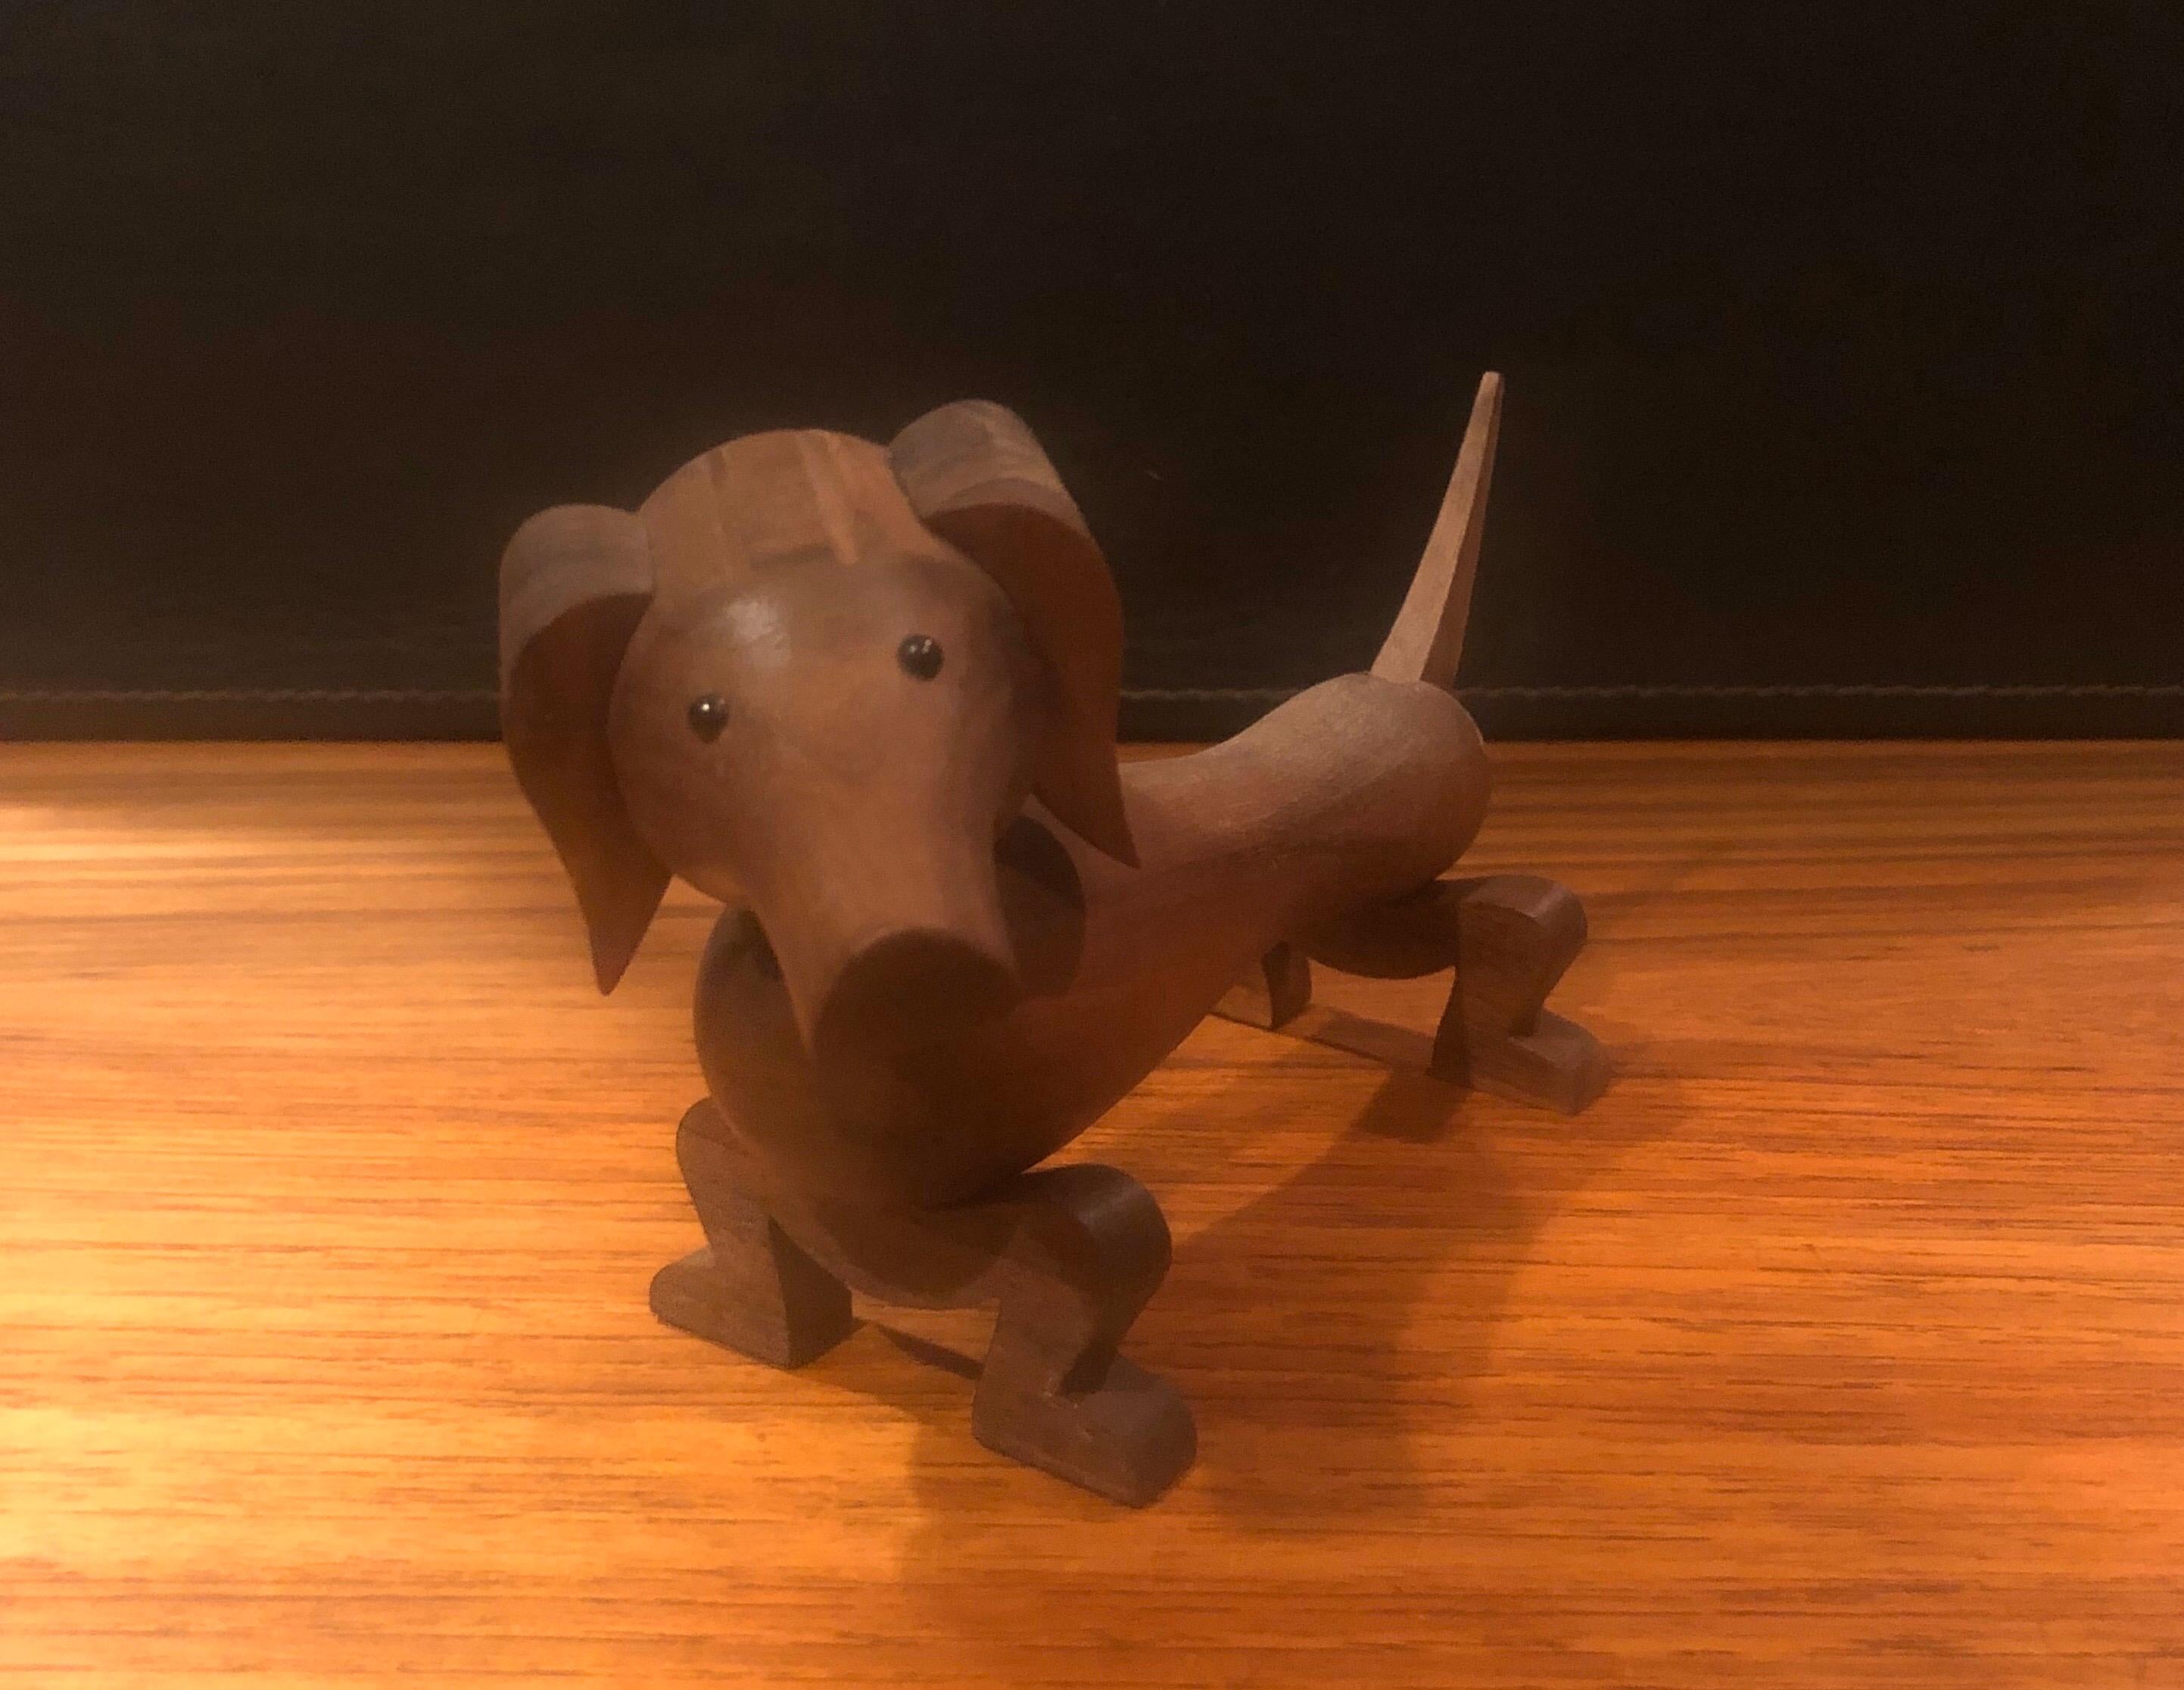 Articulated toy dachshund / dog by Kay Bojesen, circa 1990s.

Kay Bojesen's dachshund, born in 1934, is a world-famous classic for children and adults alike. 

The dog is made of gorgeous solid walnut and his limbs, head and tail articulate